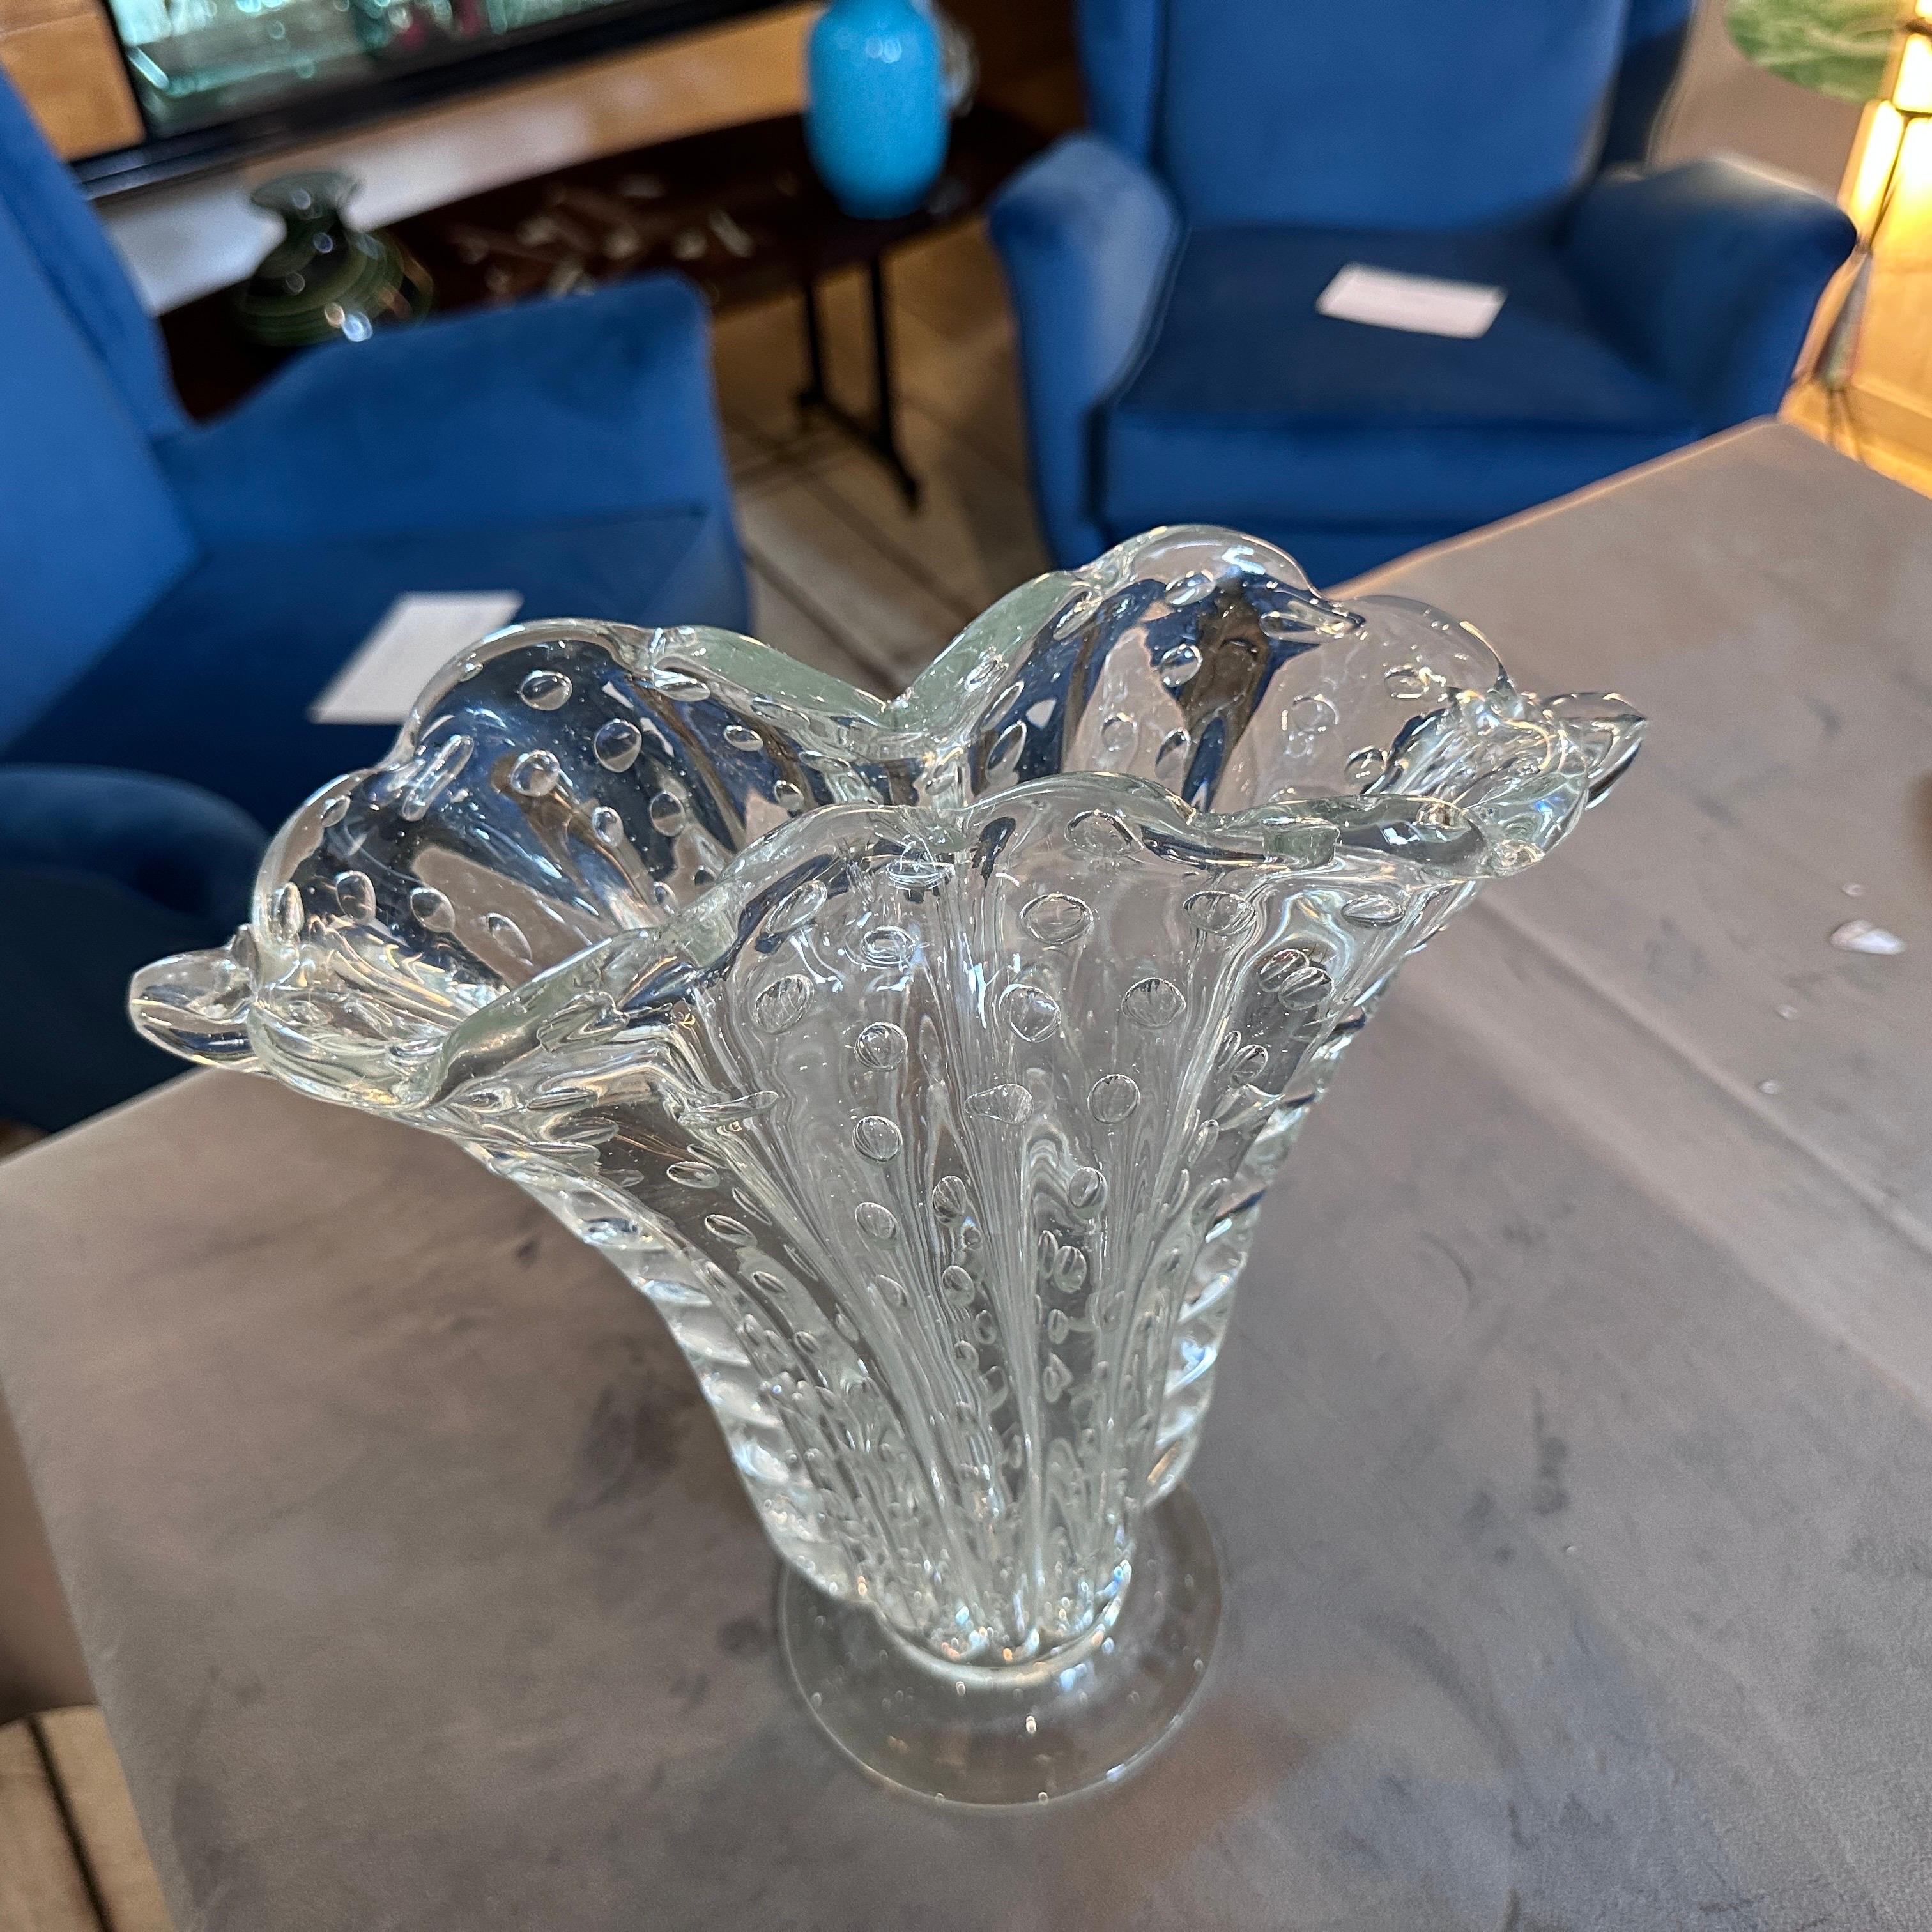 A transparent Murano glass vase designed and manufactured in Venice by Barovier in the fifties, it's in very good condition. The vase by Barovier is a stunning piece of art glass that showcases the mastery of Murano glassmaking and the iconic style